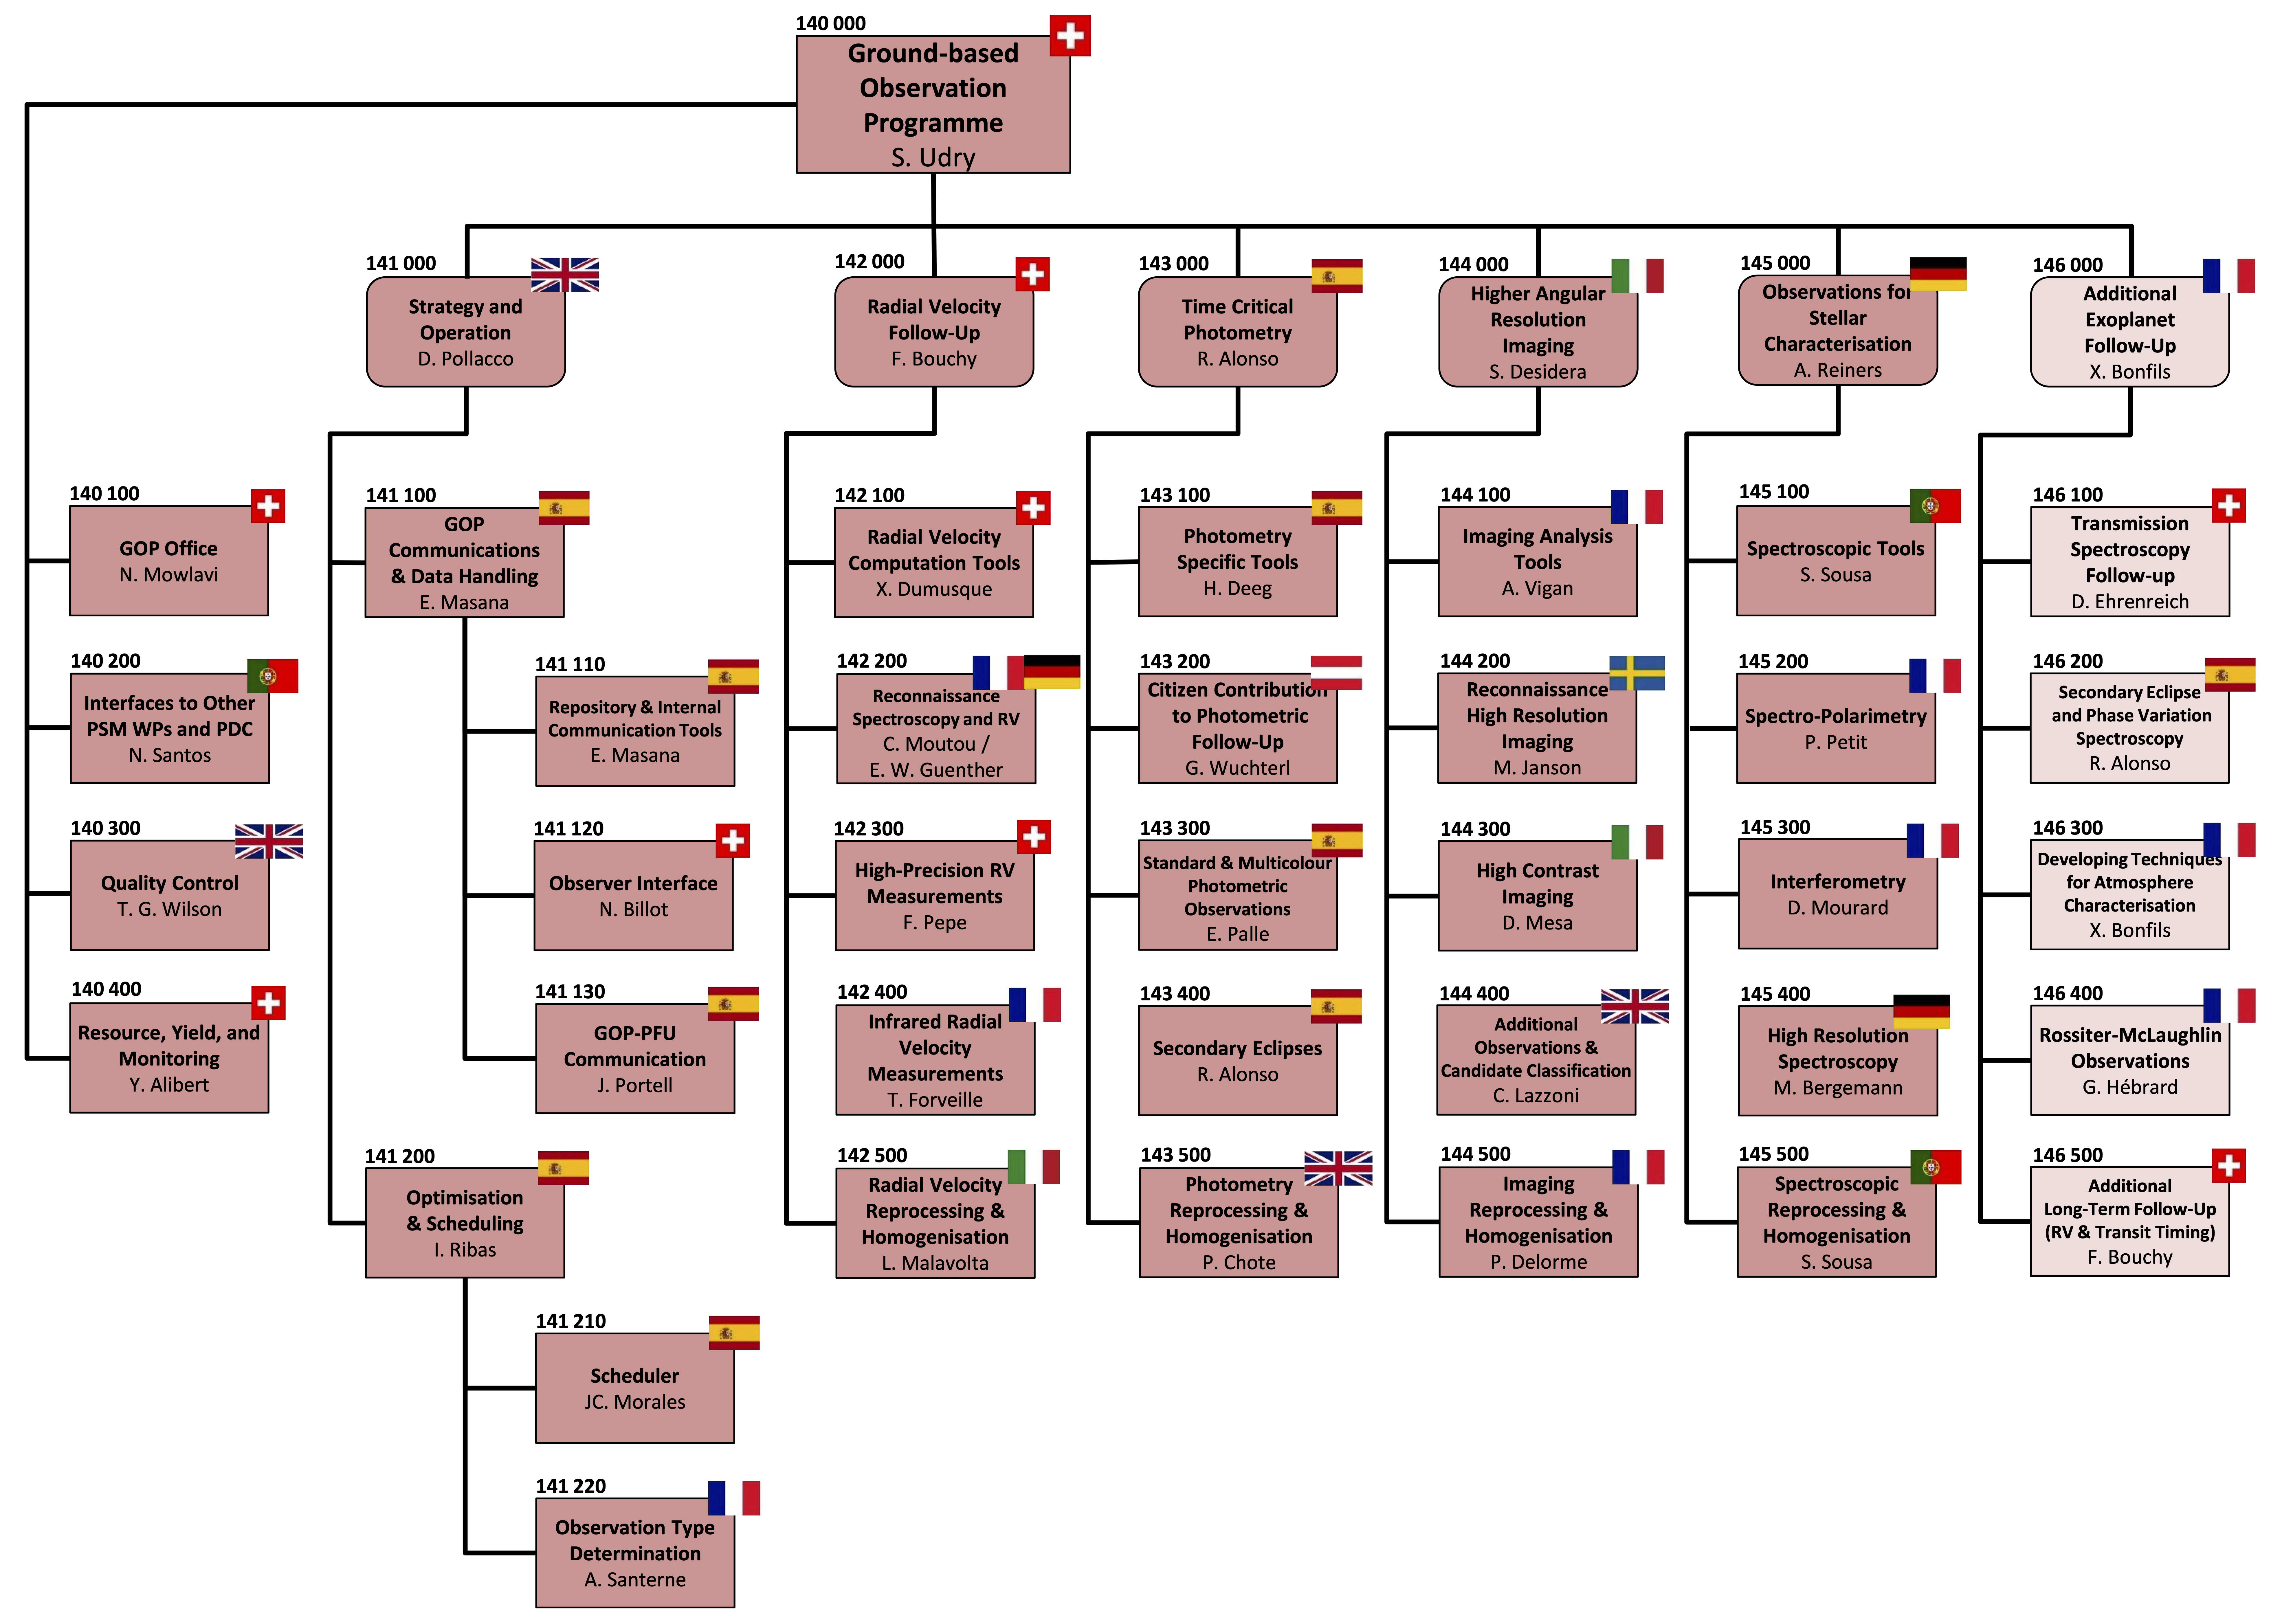 Organisation chart for the GOP branch of the PSM